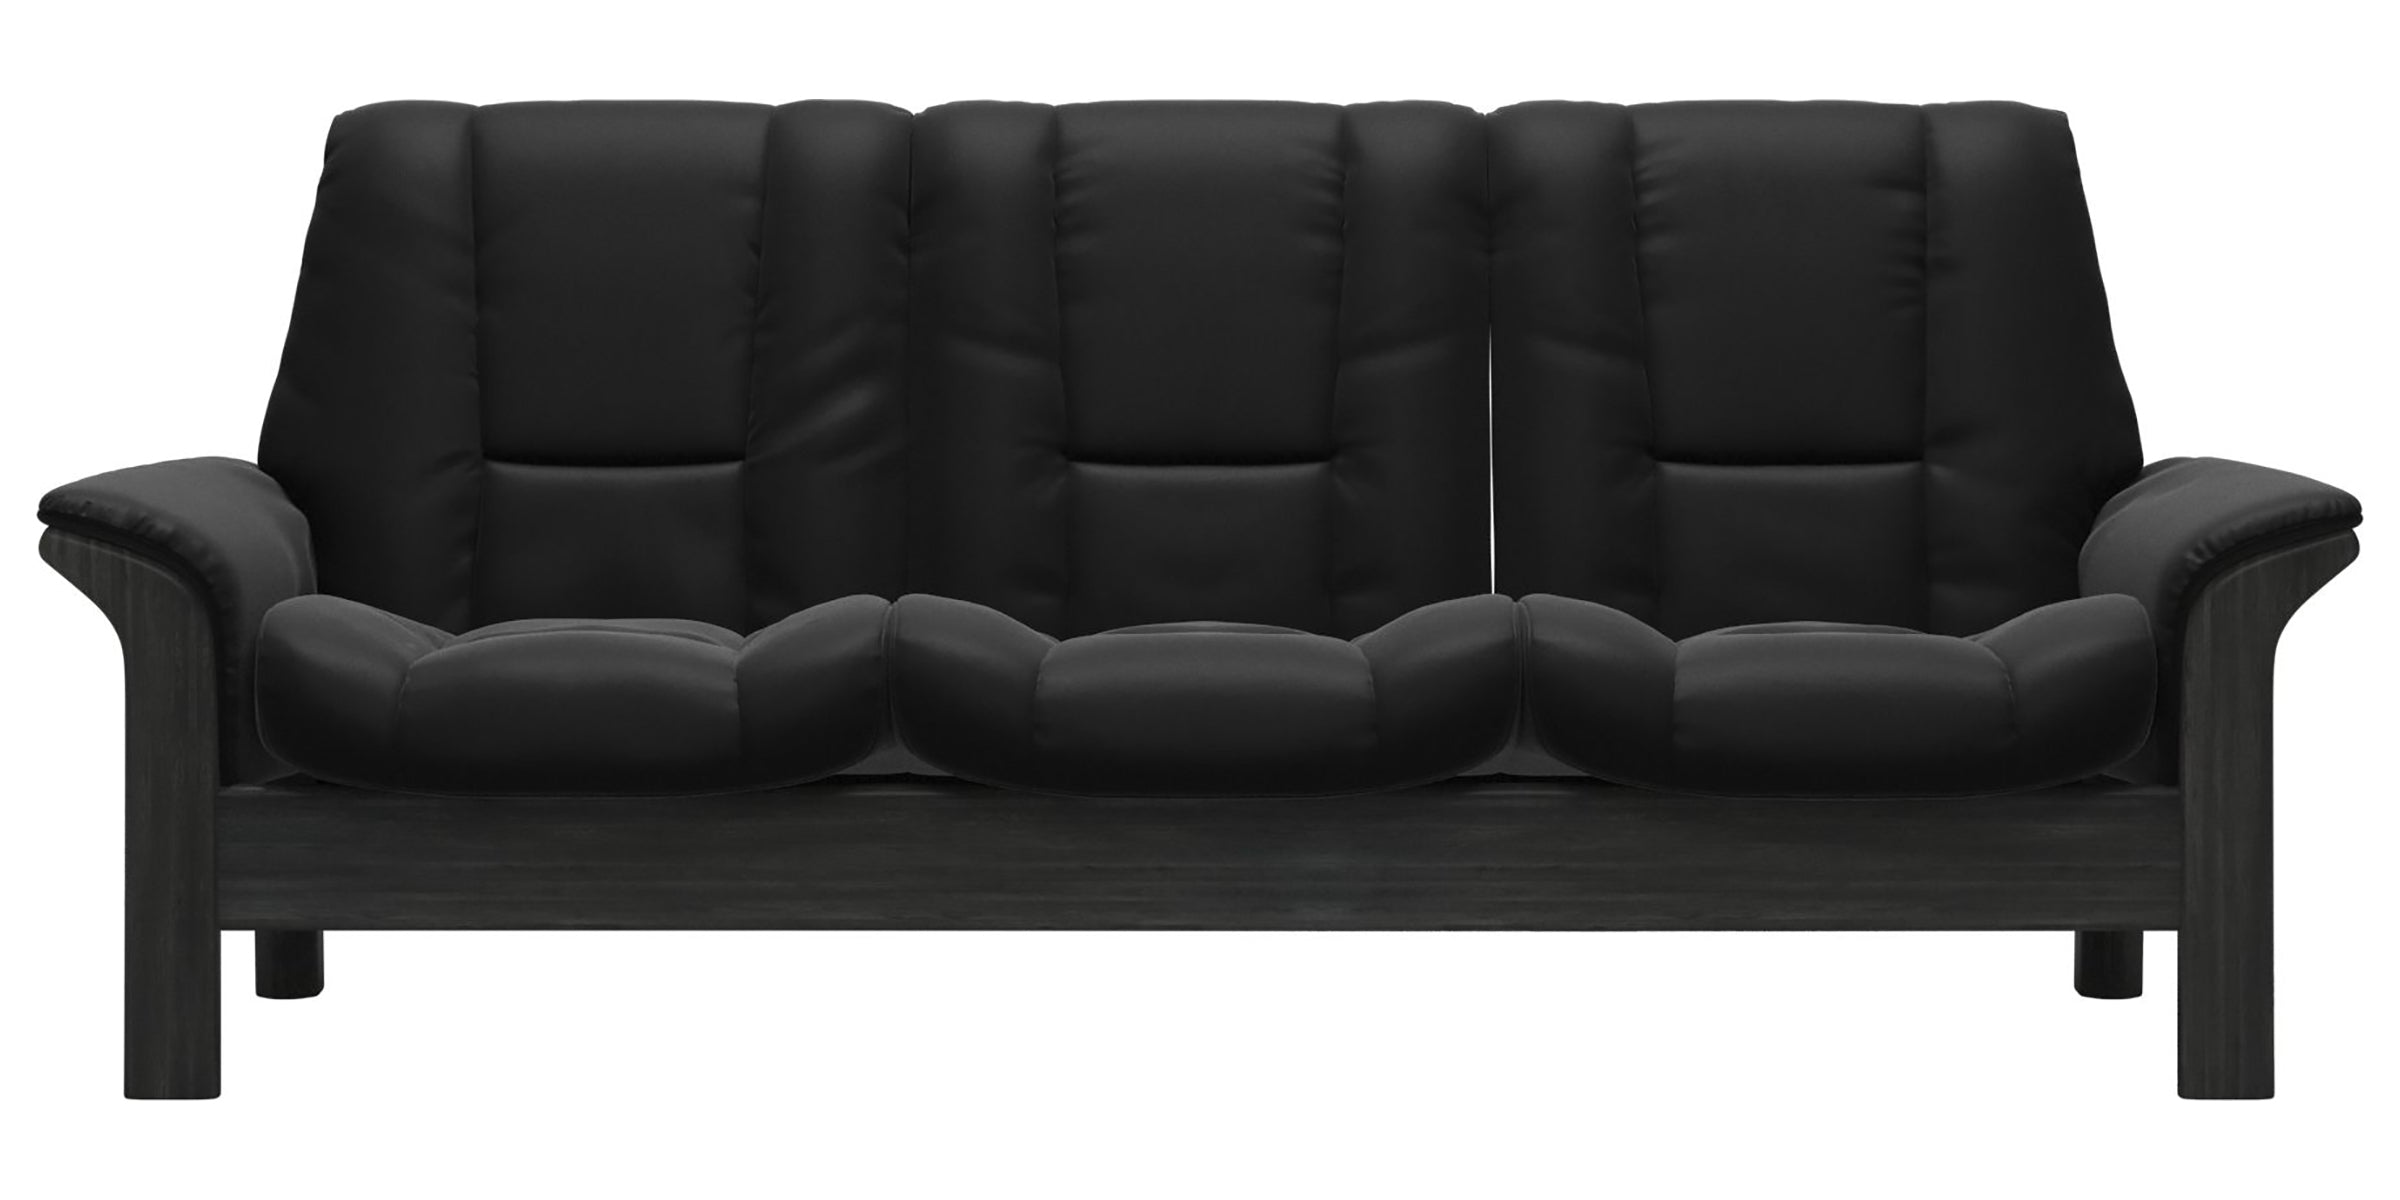 Paloma Leather Black and Grey Base | Stressless Windsor 3-Seater Low Back Sofa | Valley Ridge Furniture